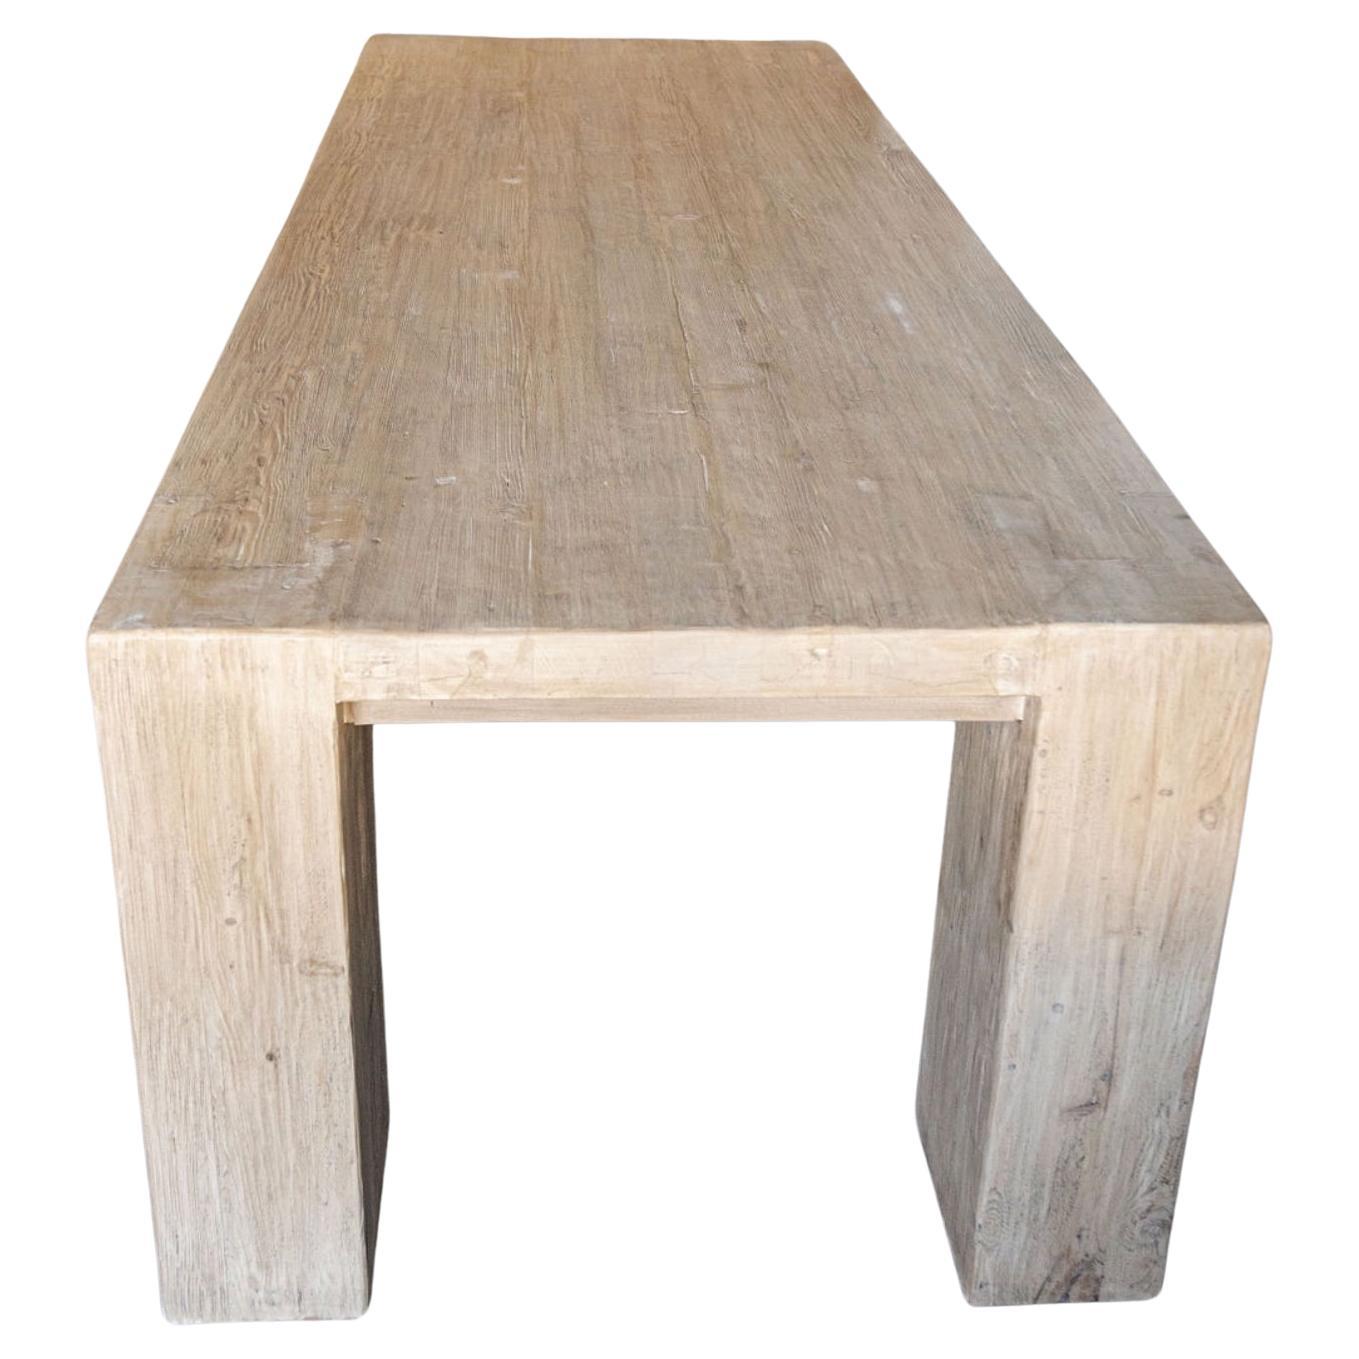 Bozeman dining table For Sale